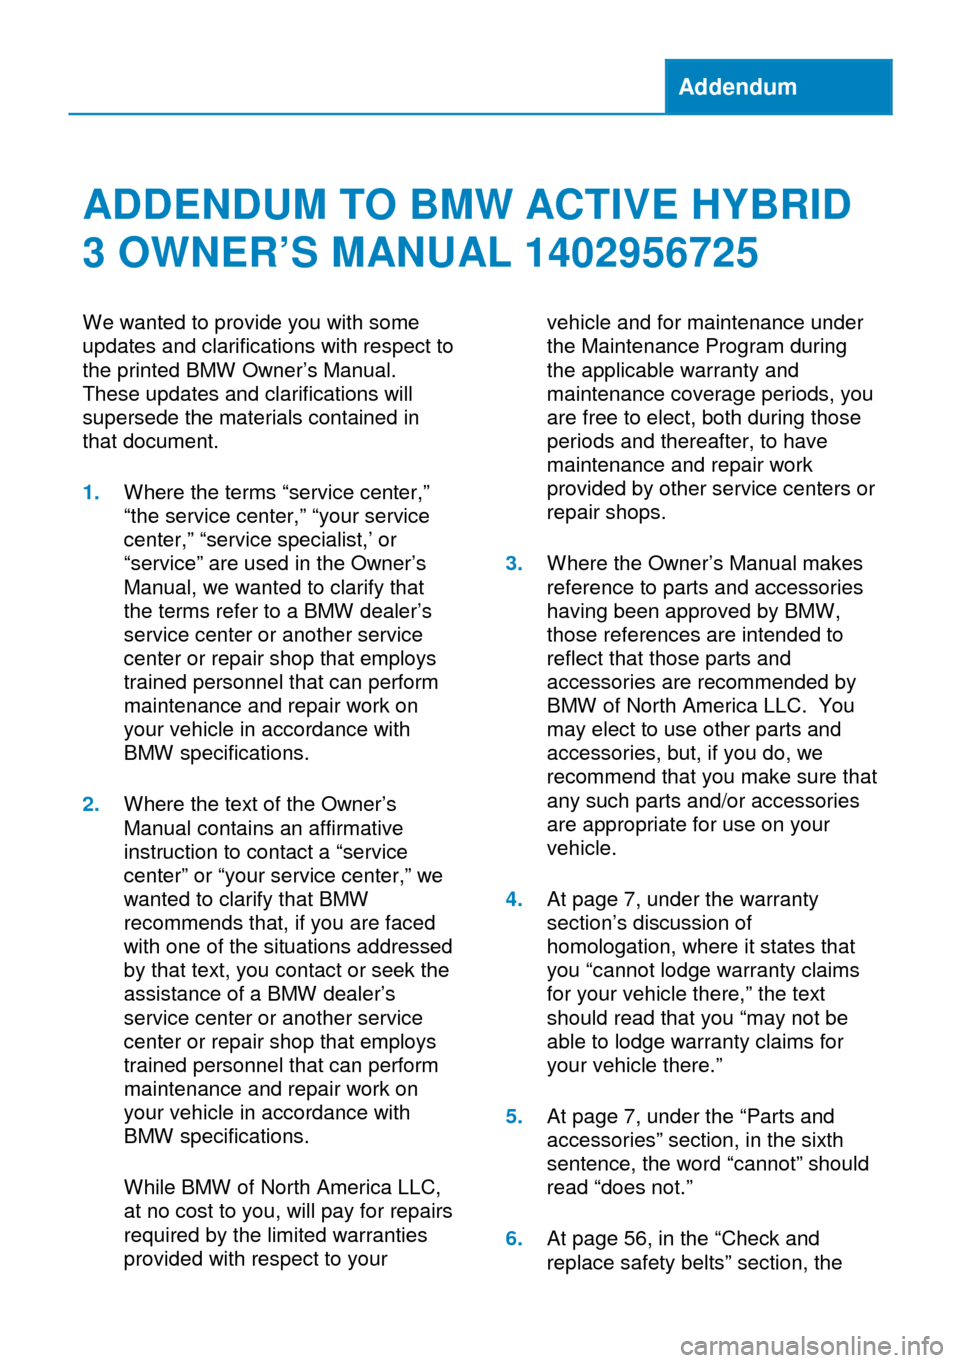 BMW ACTIVE HYBRID 3 2014 F30H Owners Manual Addendum
ADDENDUM TO BMW ACTIVE HYBRID
3 OWNER’S MANUAL 1402956725
We wanted to provide you with some
updates and clarifications with respect to
the printed BMW Owner’s Manual.
These updates and c